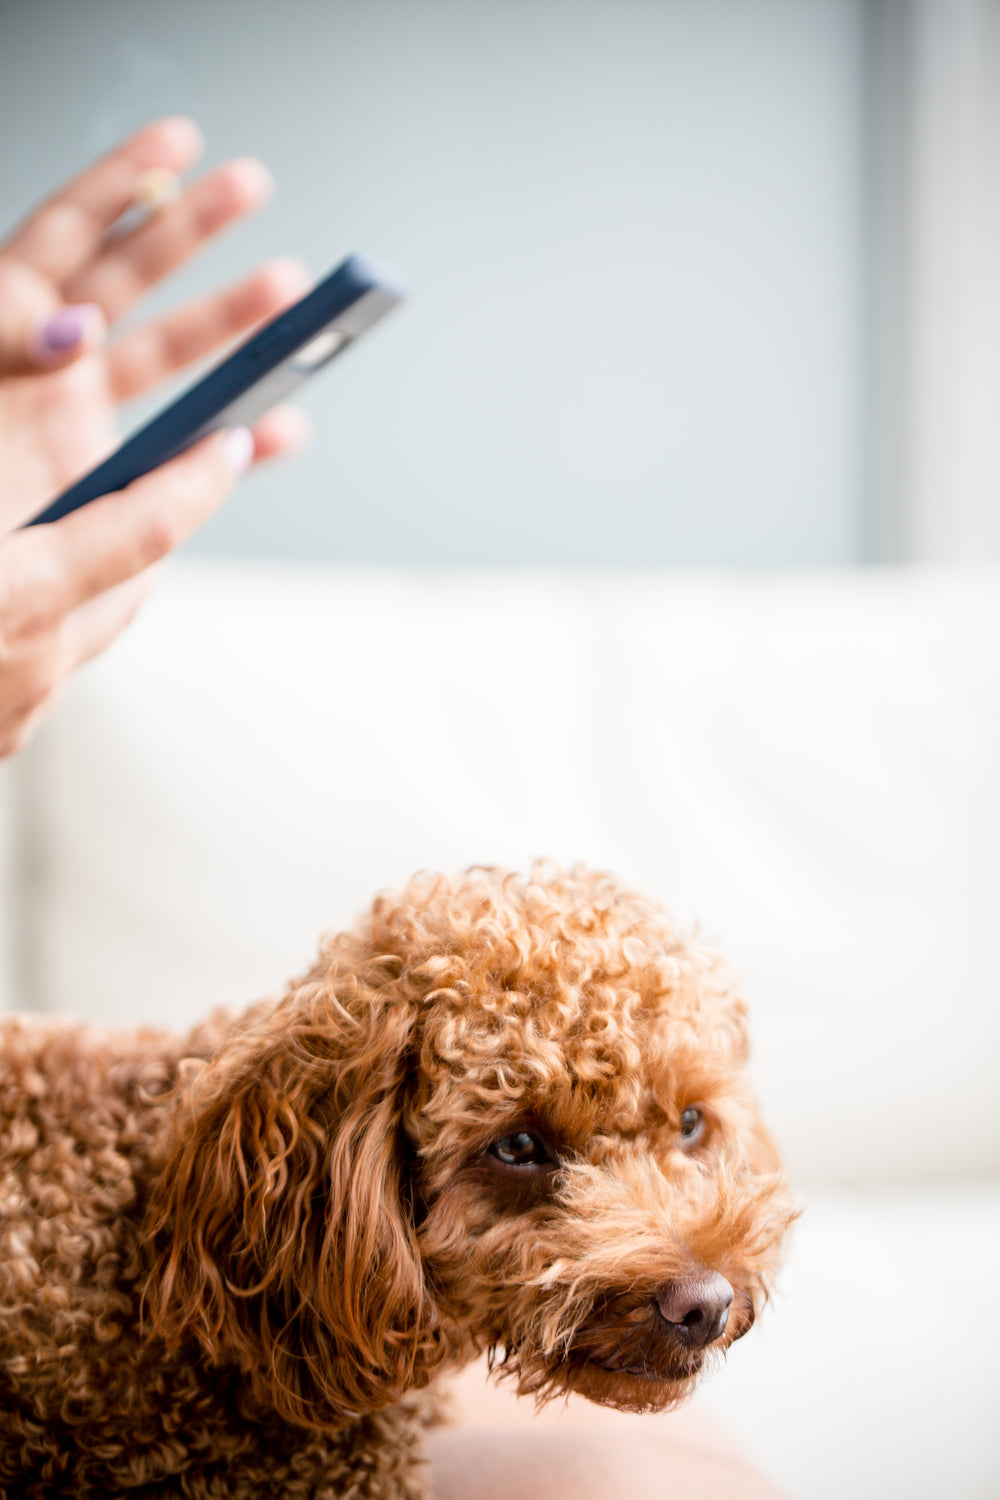 dog and hands holding cell phone